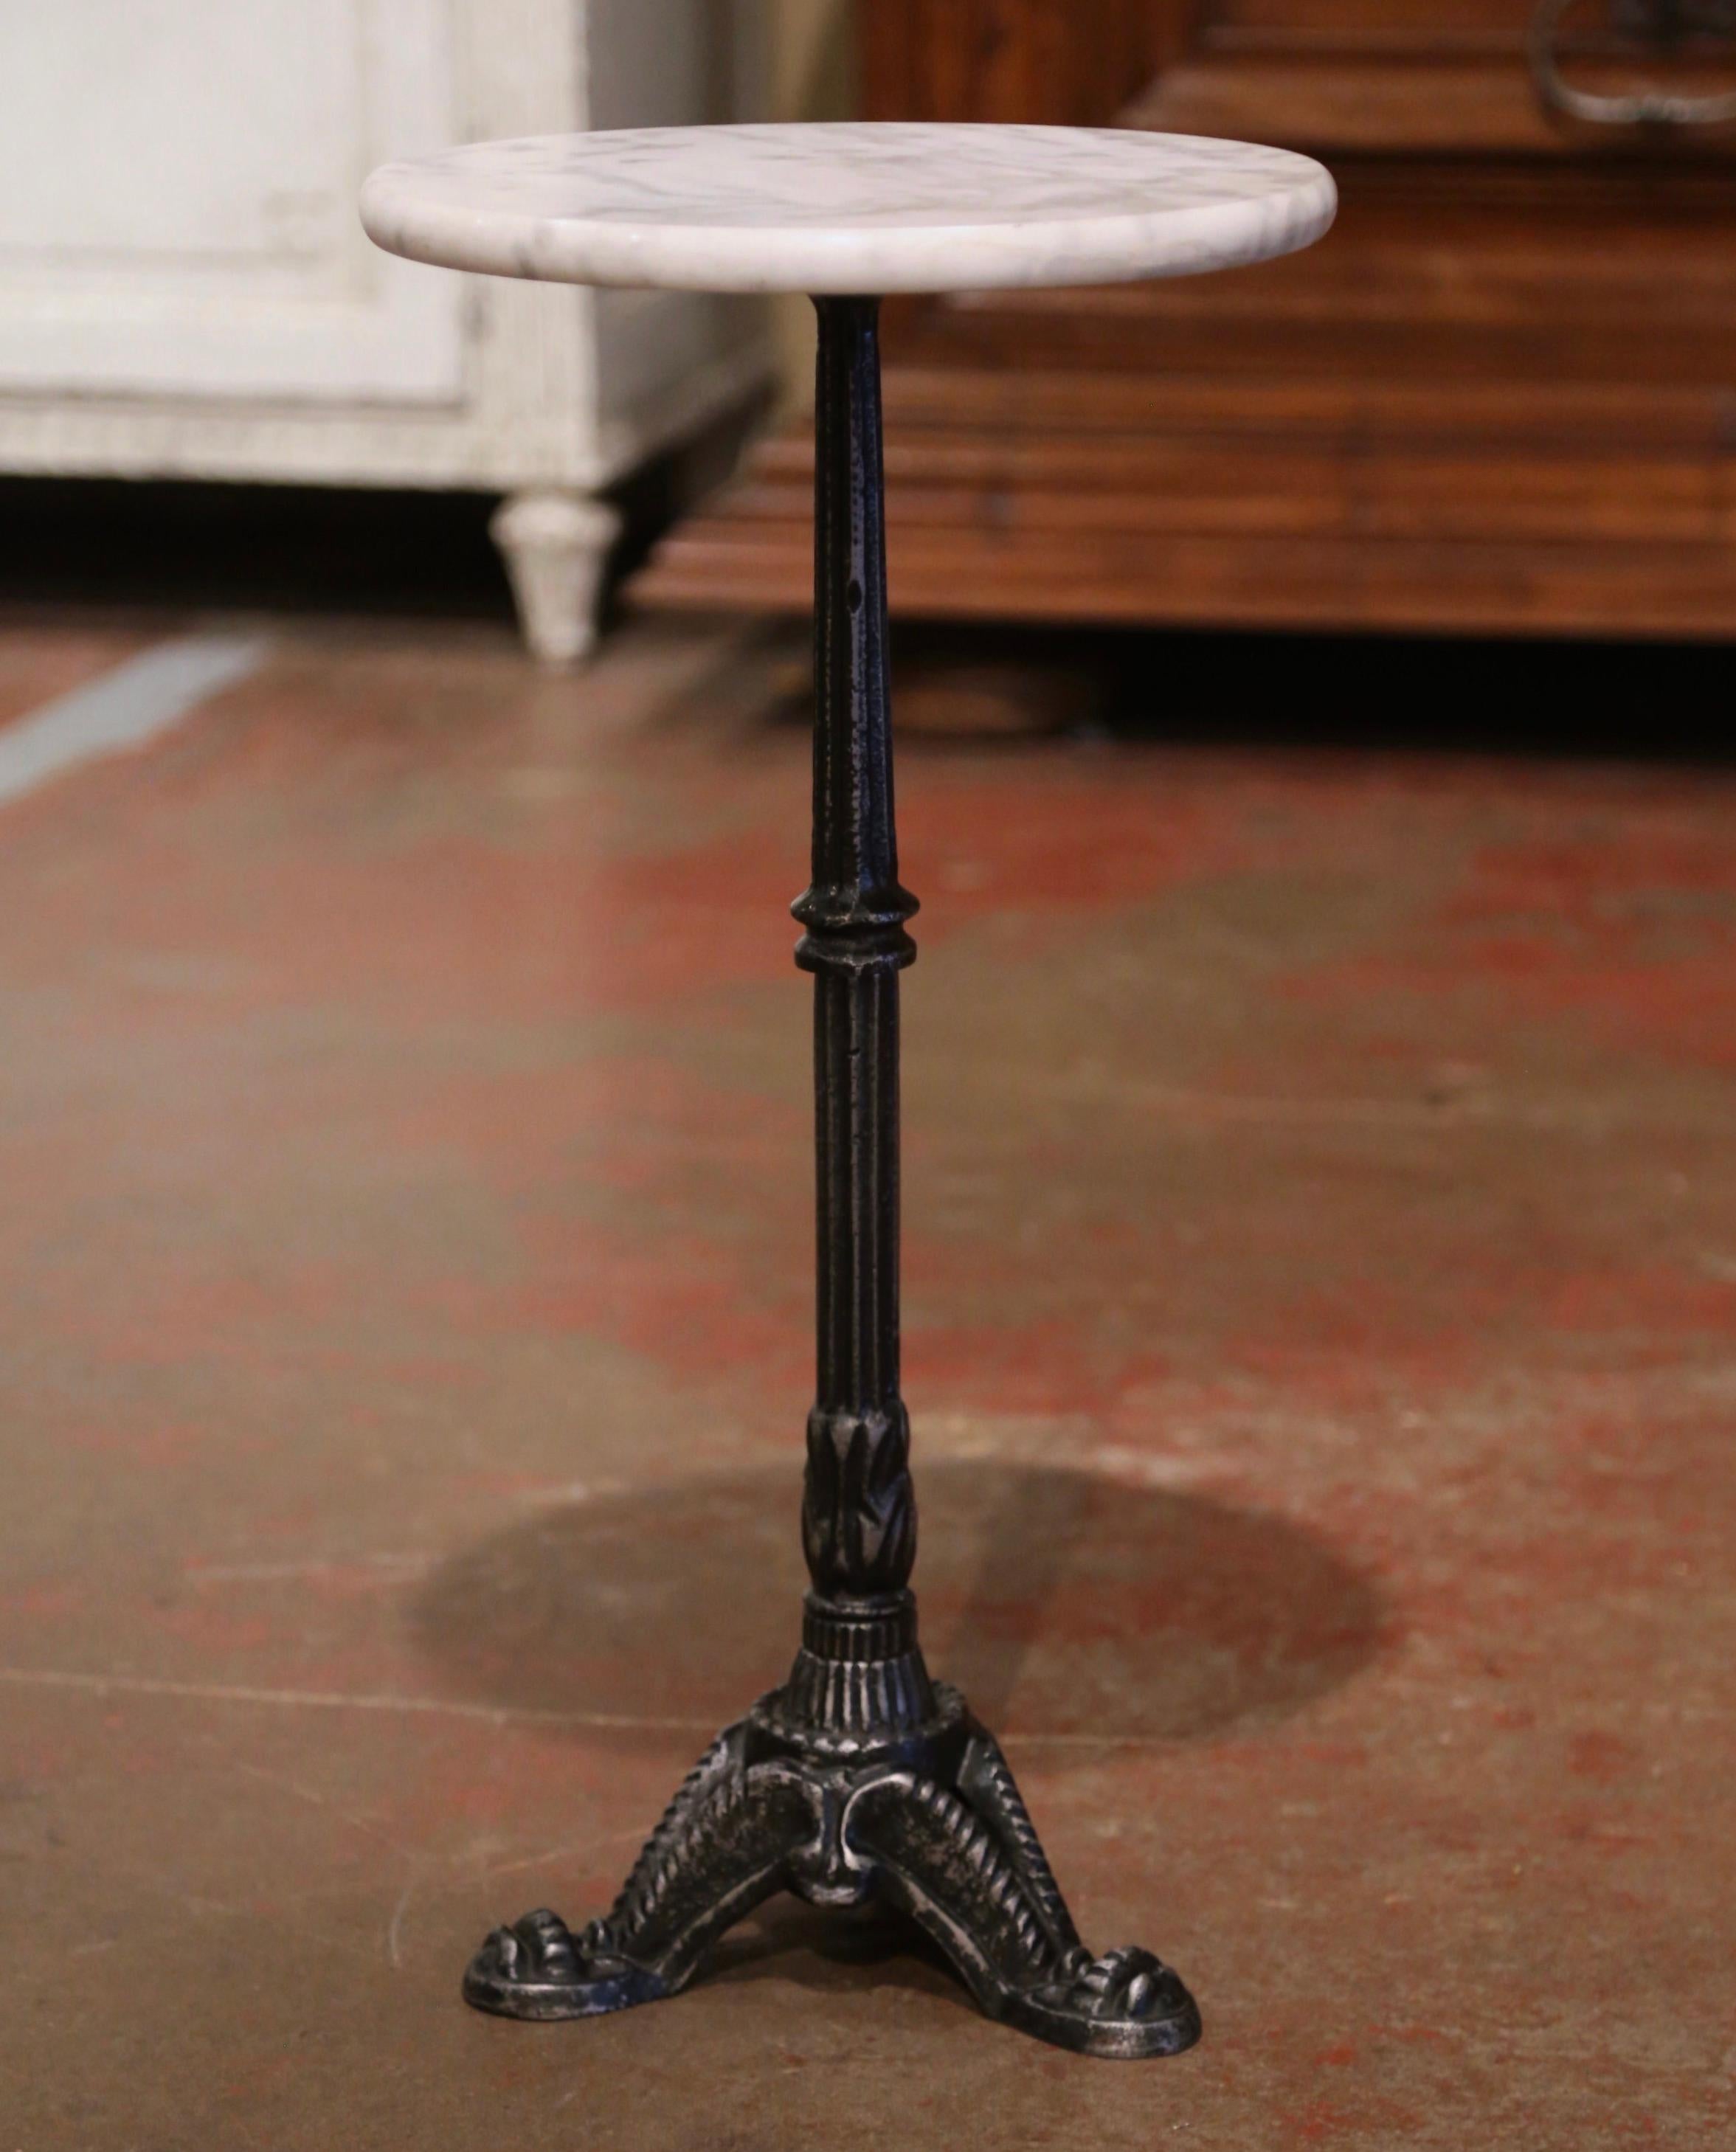 This elegant, antique round pedestal table was crafted in Southern France, circa 1920. The small end table sits on three curved legs ending with paw feet under a tapered and fluted pedestal stem. The side table is topped with a white and grey round